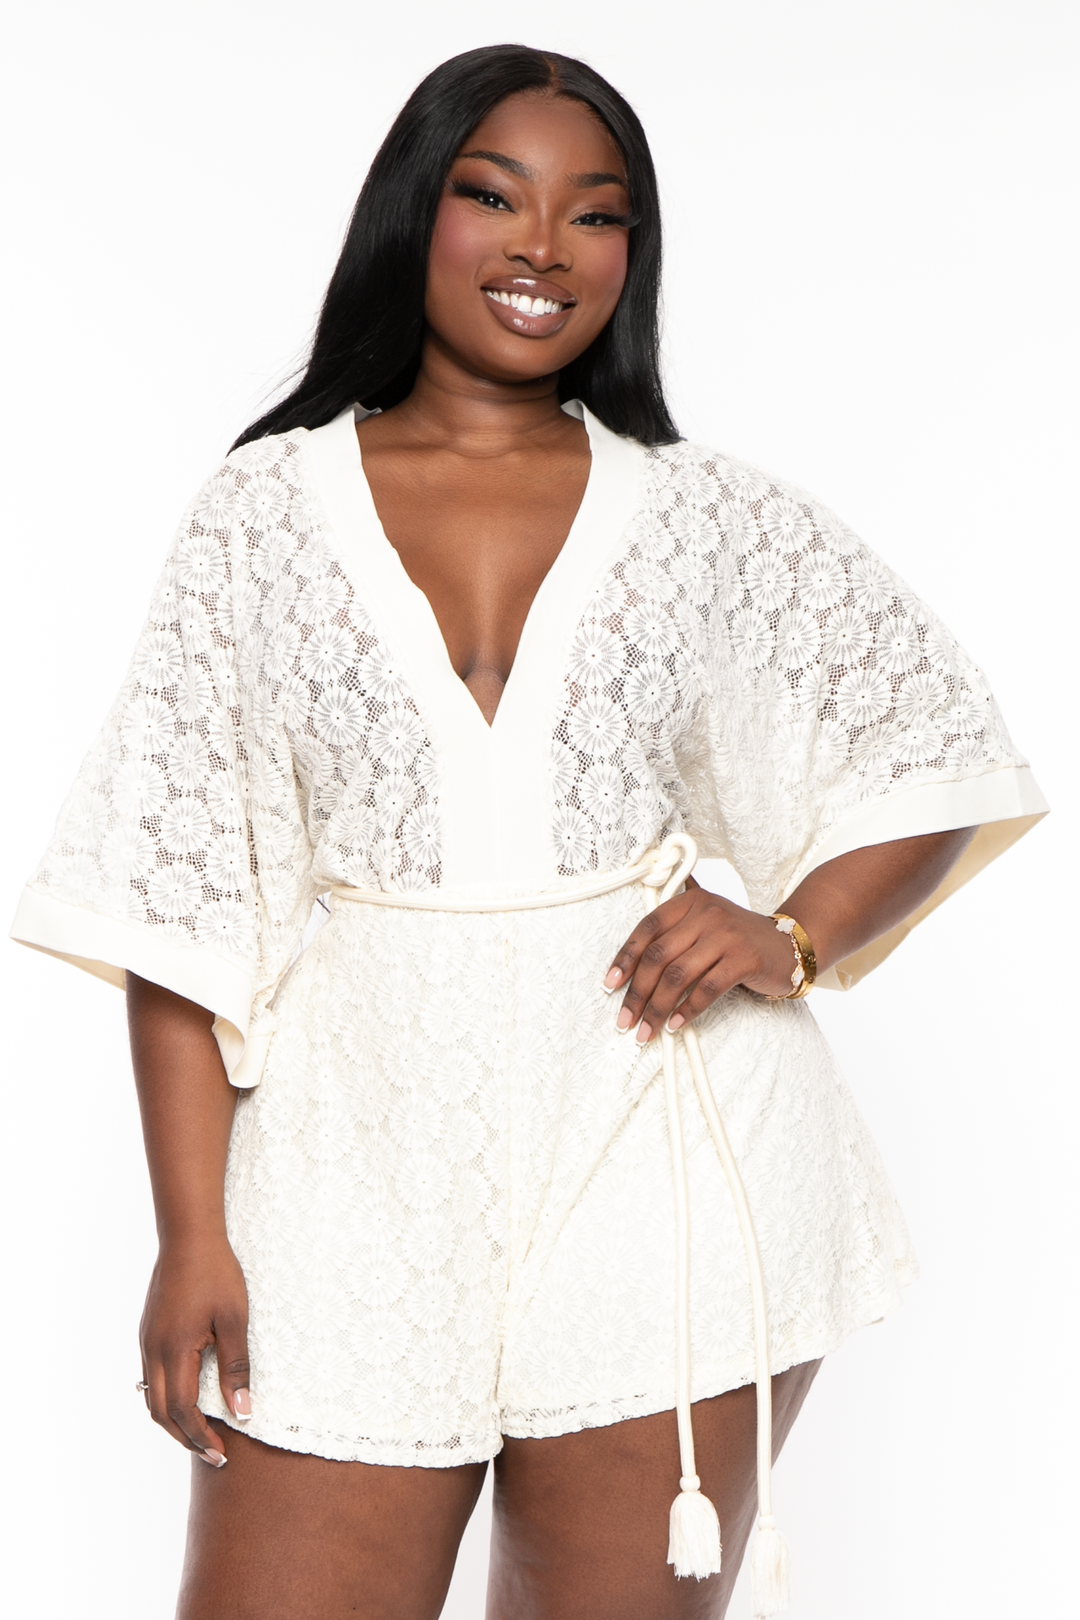 THE SANG COMPANY Jumpsuits and Rompers Plus Size Danique Crochet Romper - Ivory